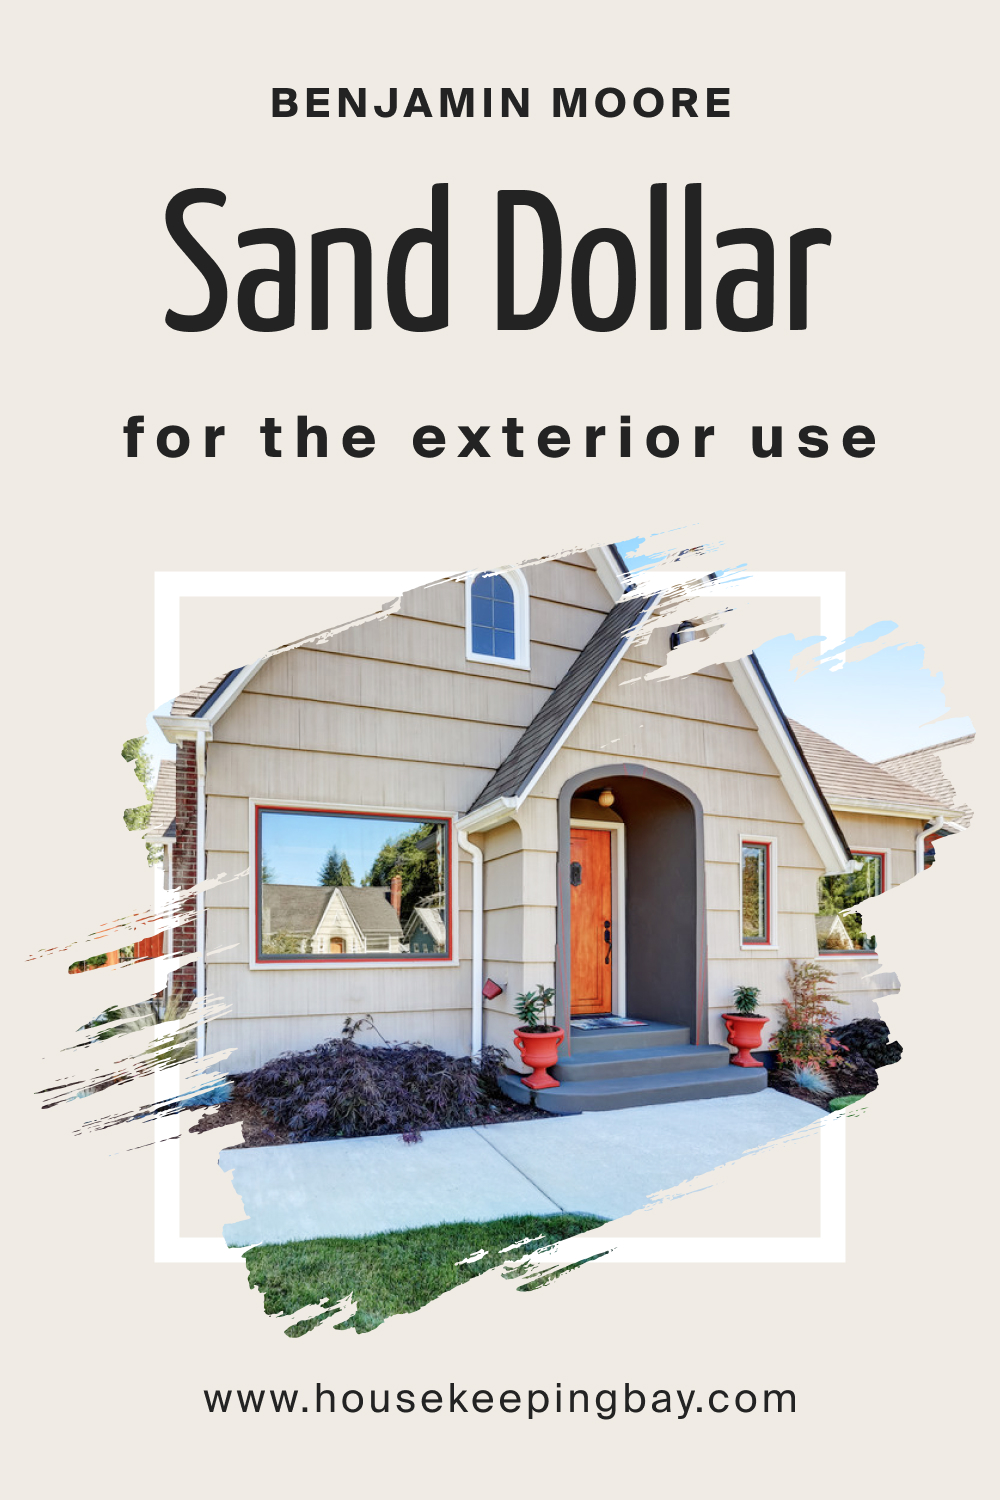 Benjamin Moore. Sand Dollar OC 71 for the Exterior Use